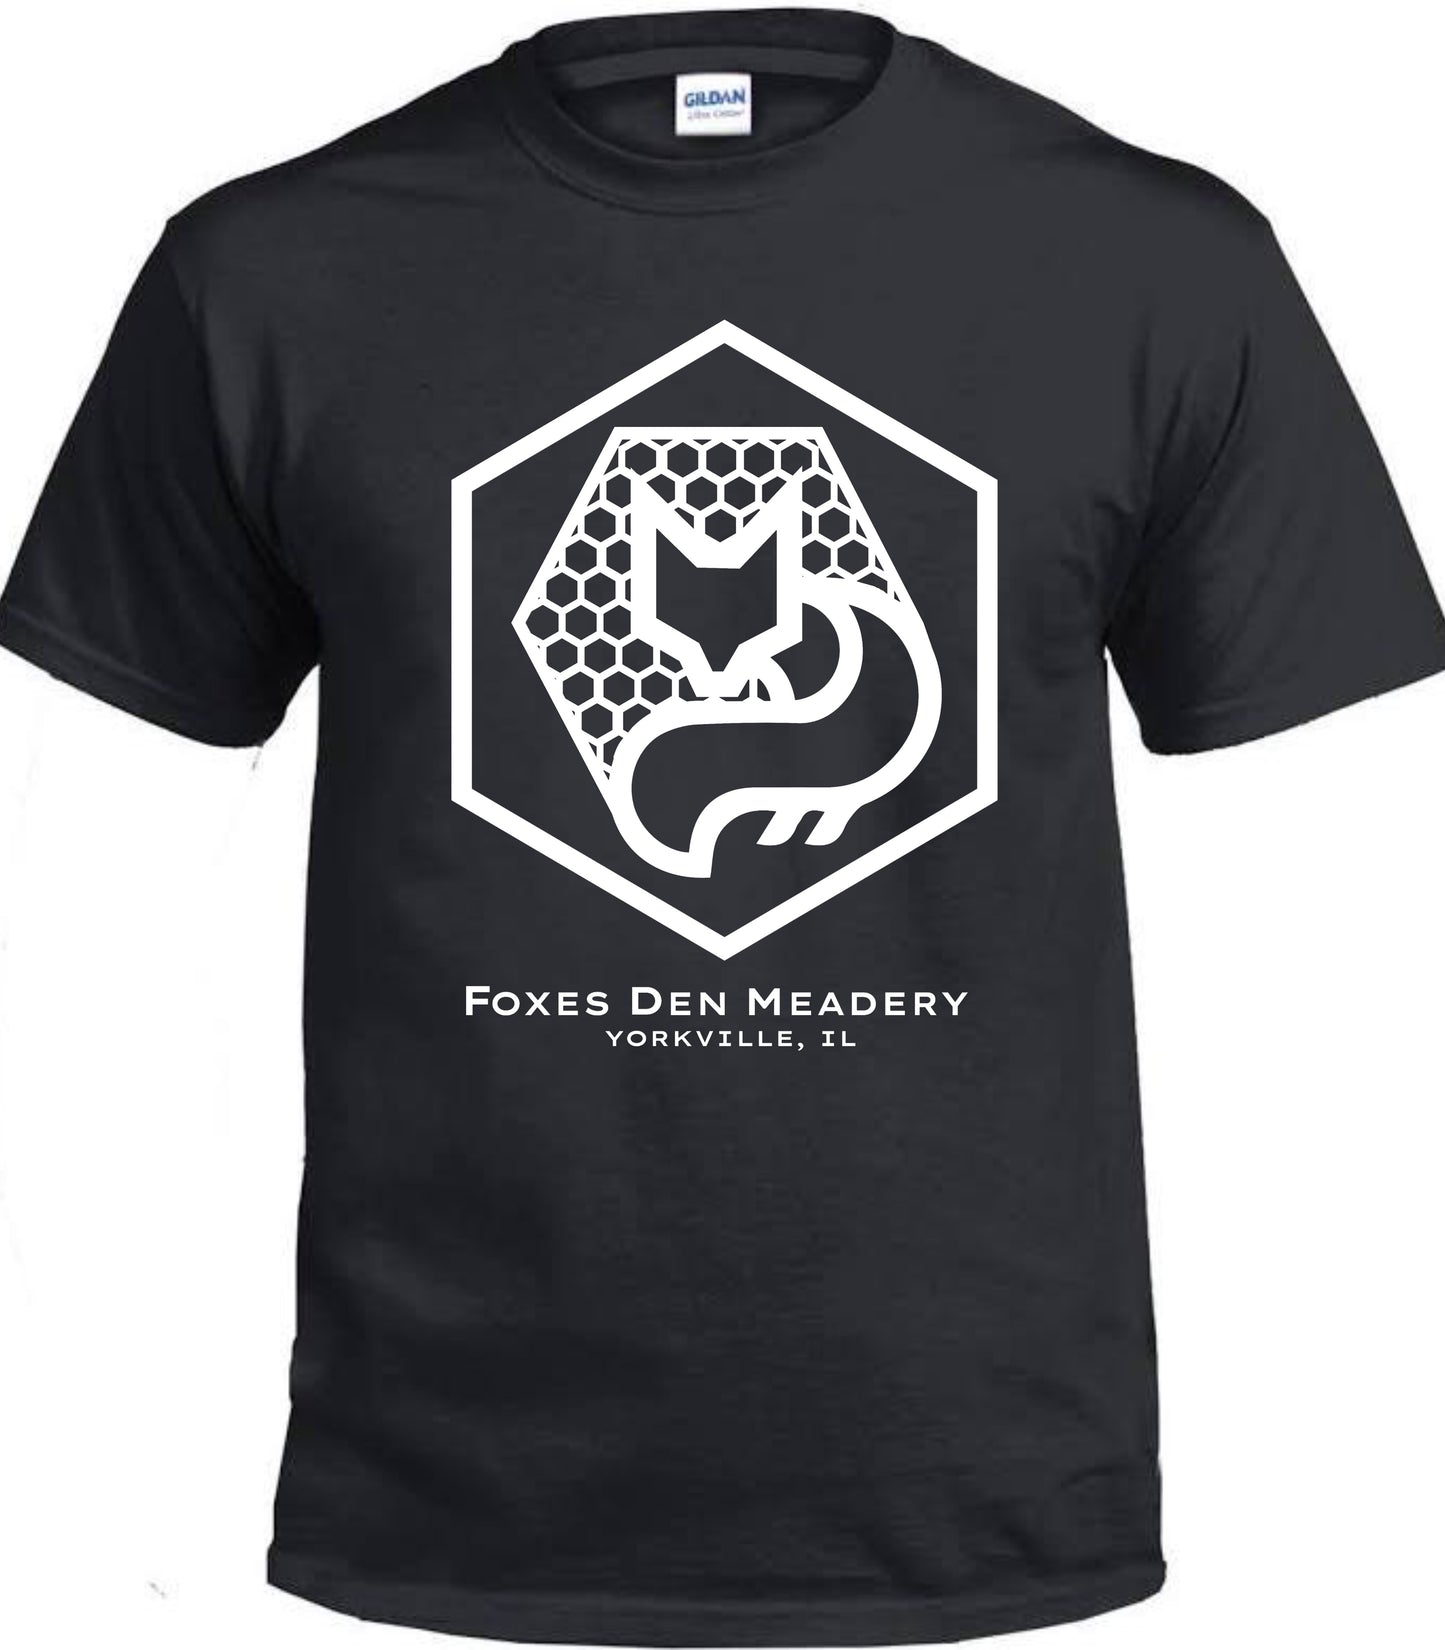 Foxes Den Meadery T-Shirt